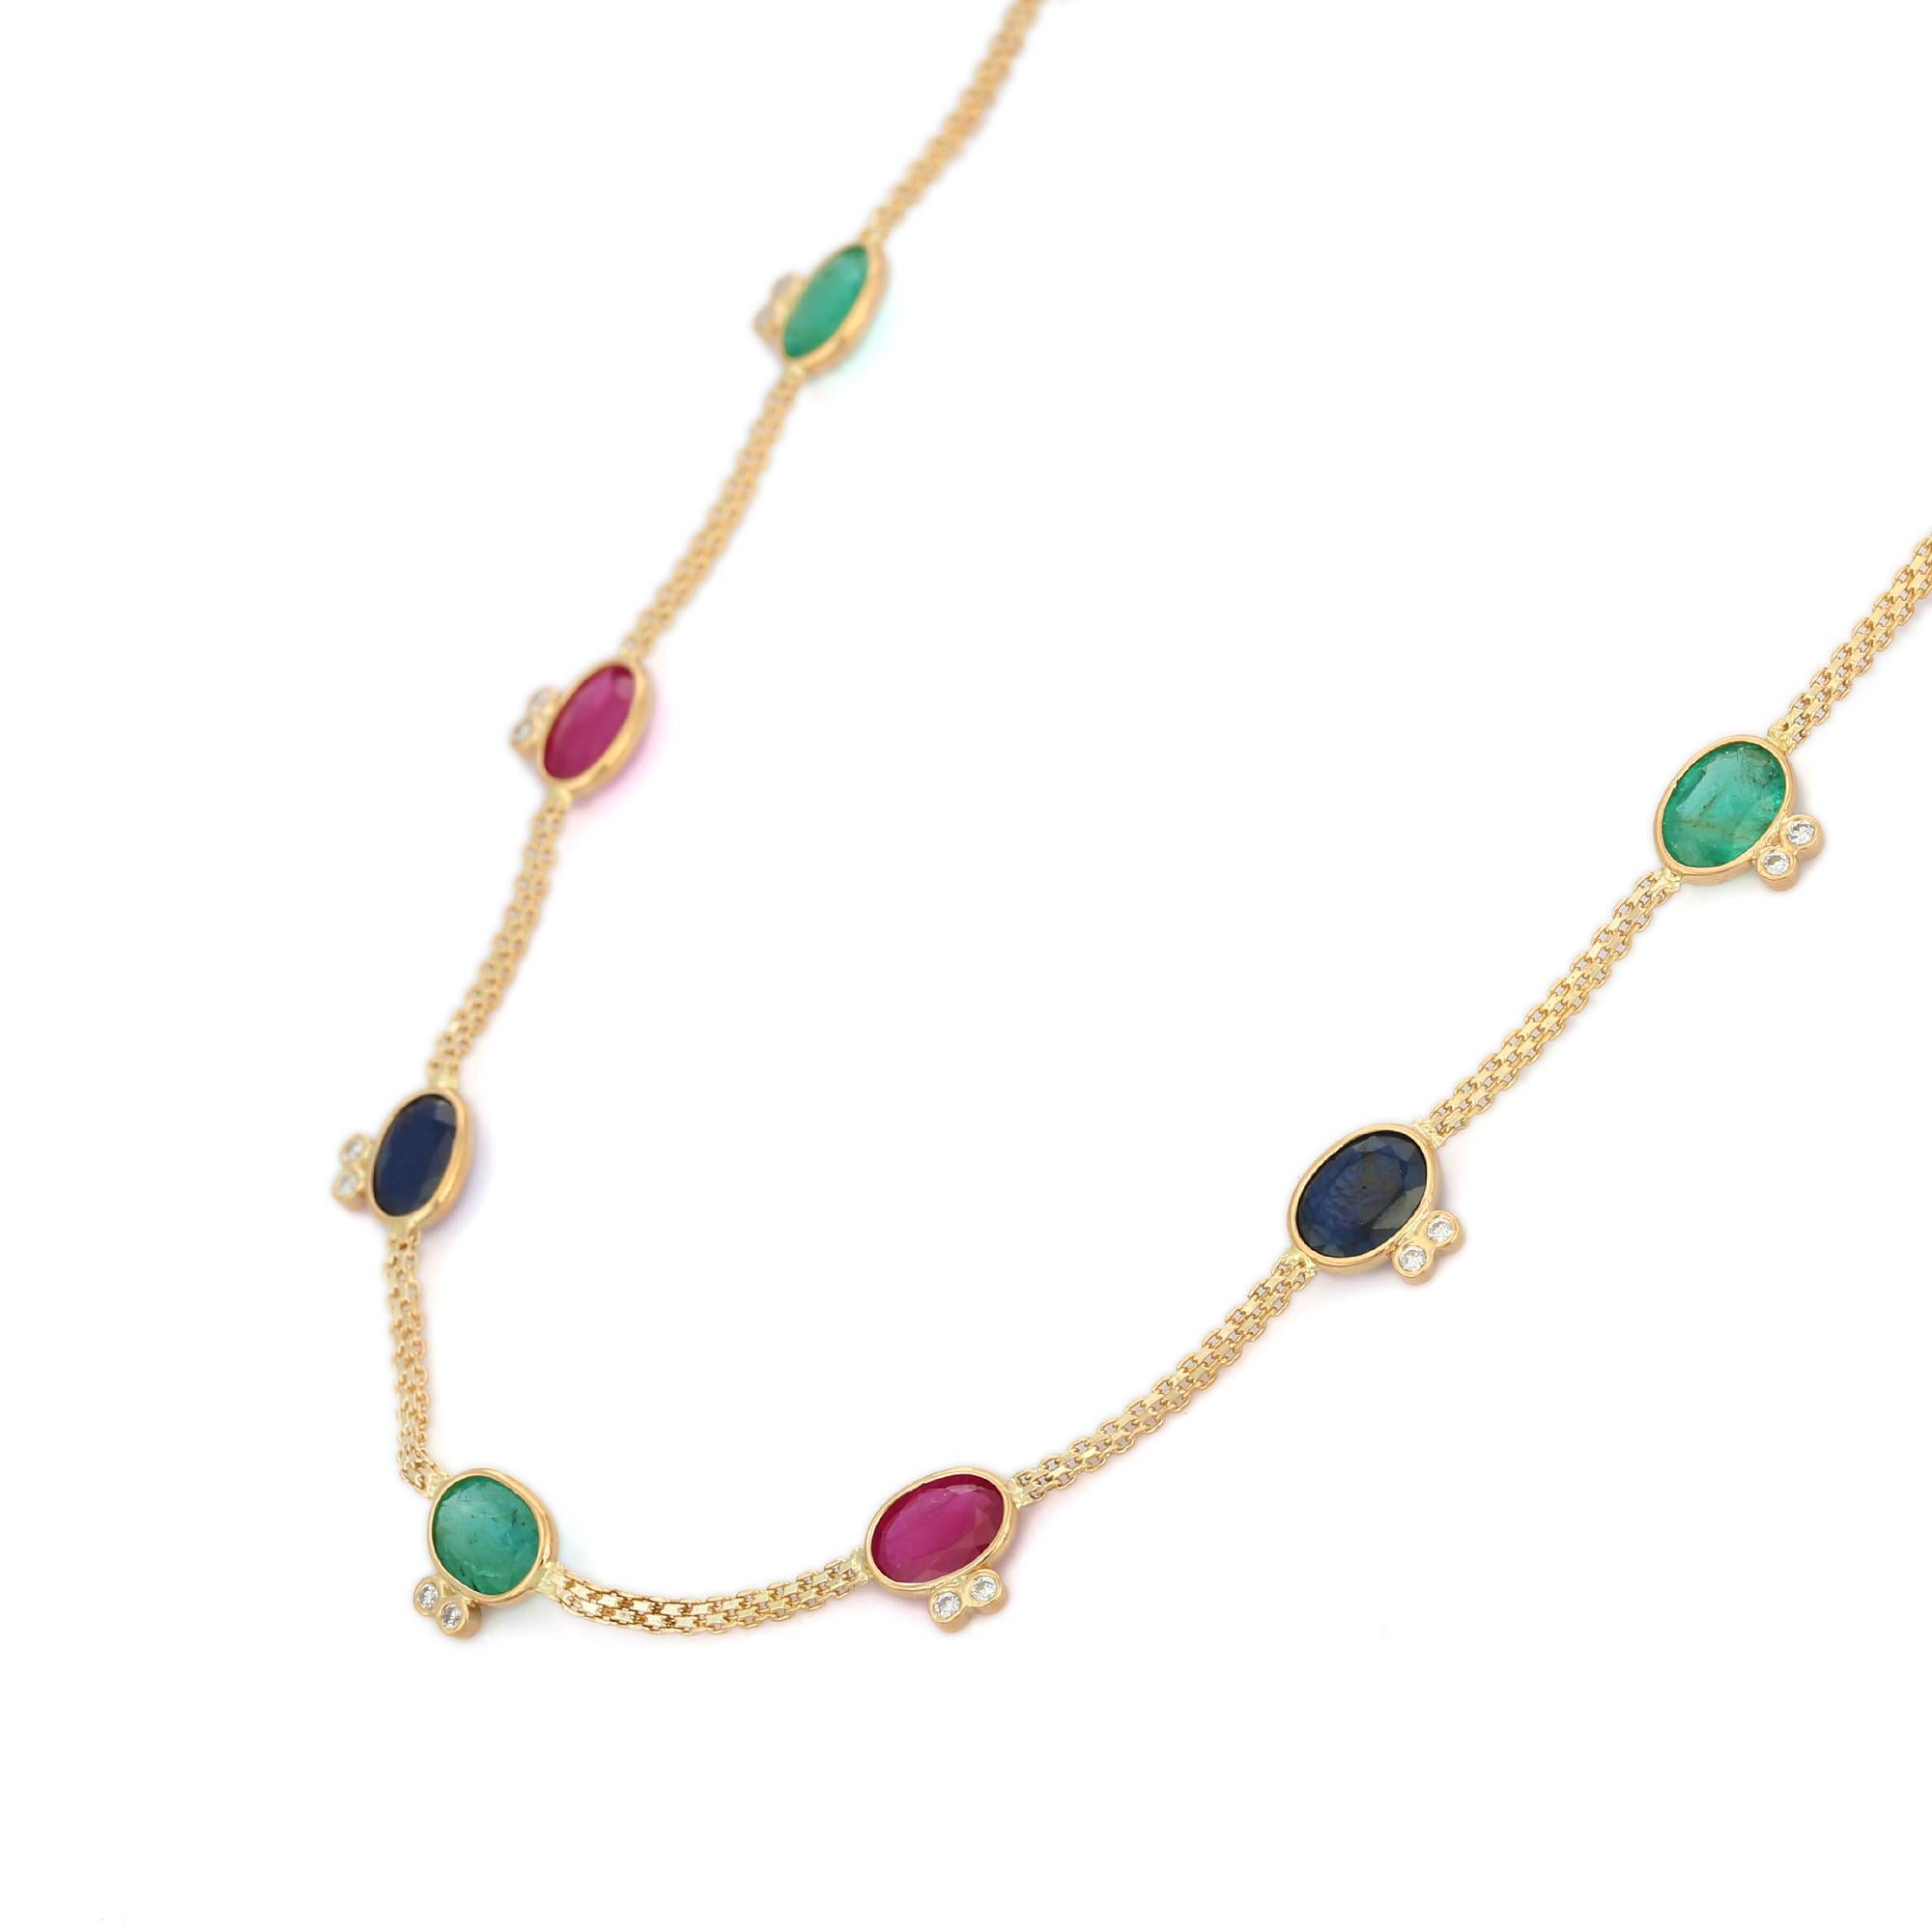 Multi Gemstone Necklace in 18K Gold studded with octagon cut emerald, ruby, sapphire pieces and diamonds.
Accessorize your look with this elegant multi gemstone beaded necklace. This stunning piece of jewelry instantly elevates a casual look or